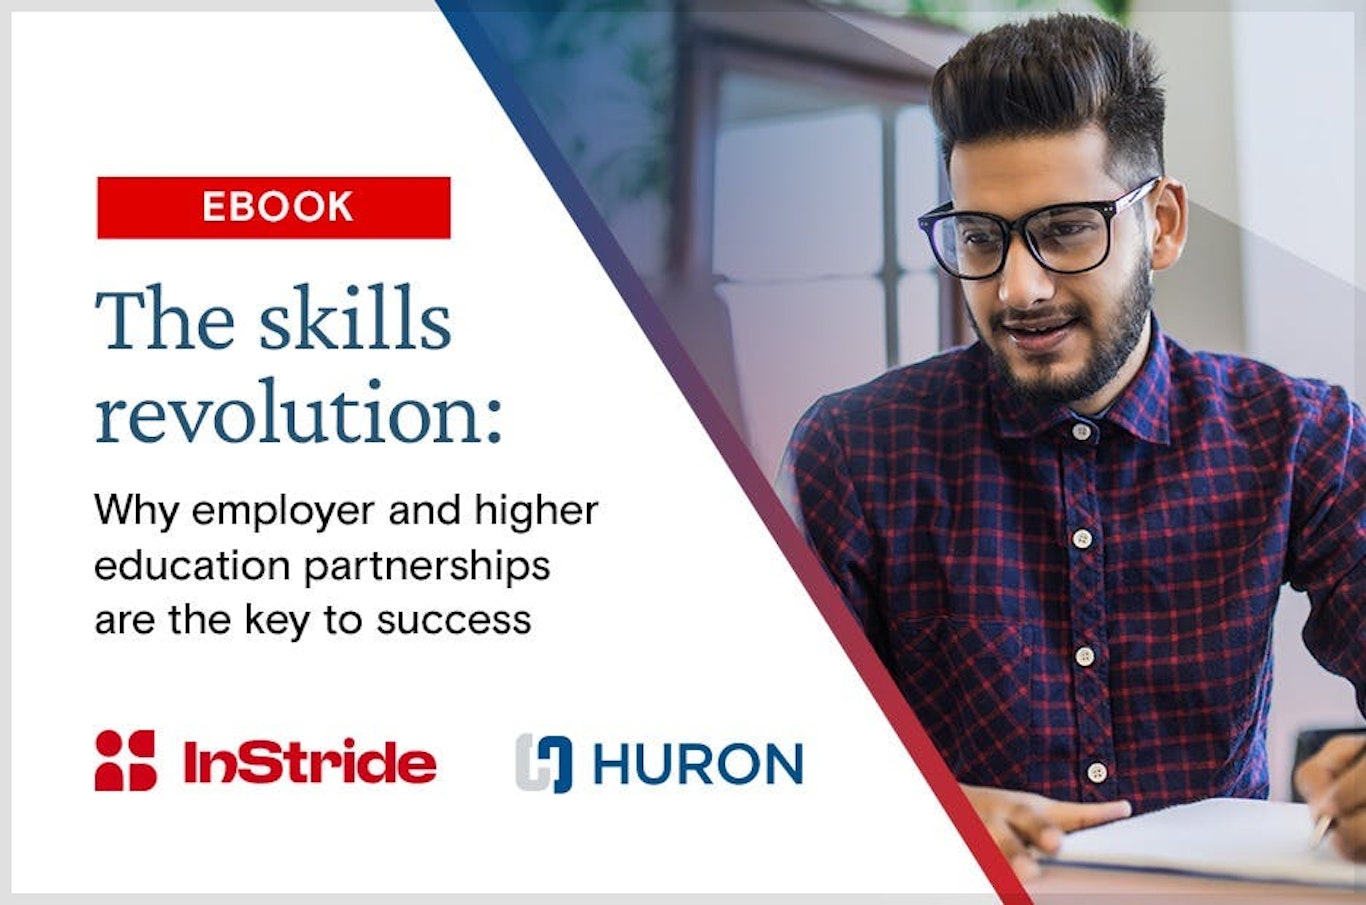 huron and instride ebook featured image